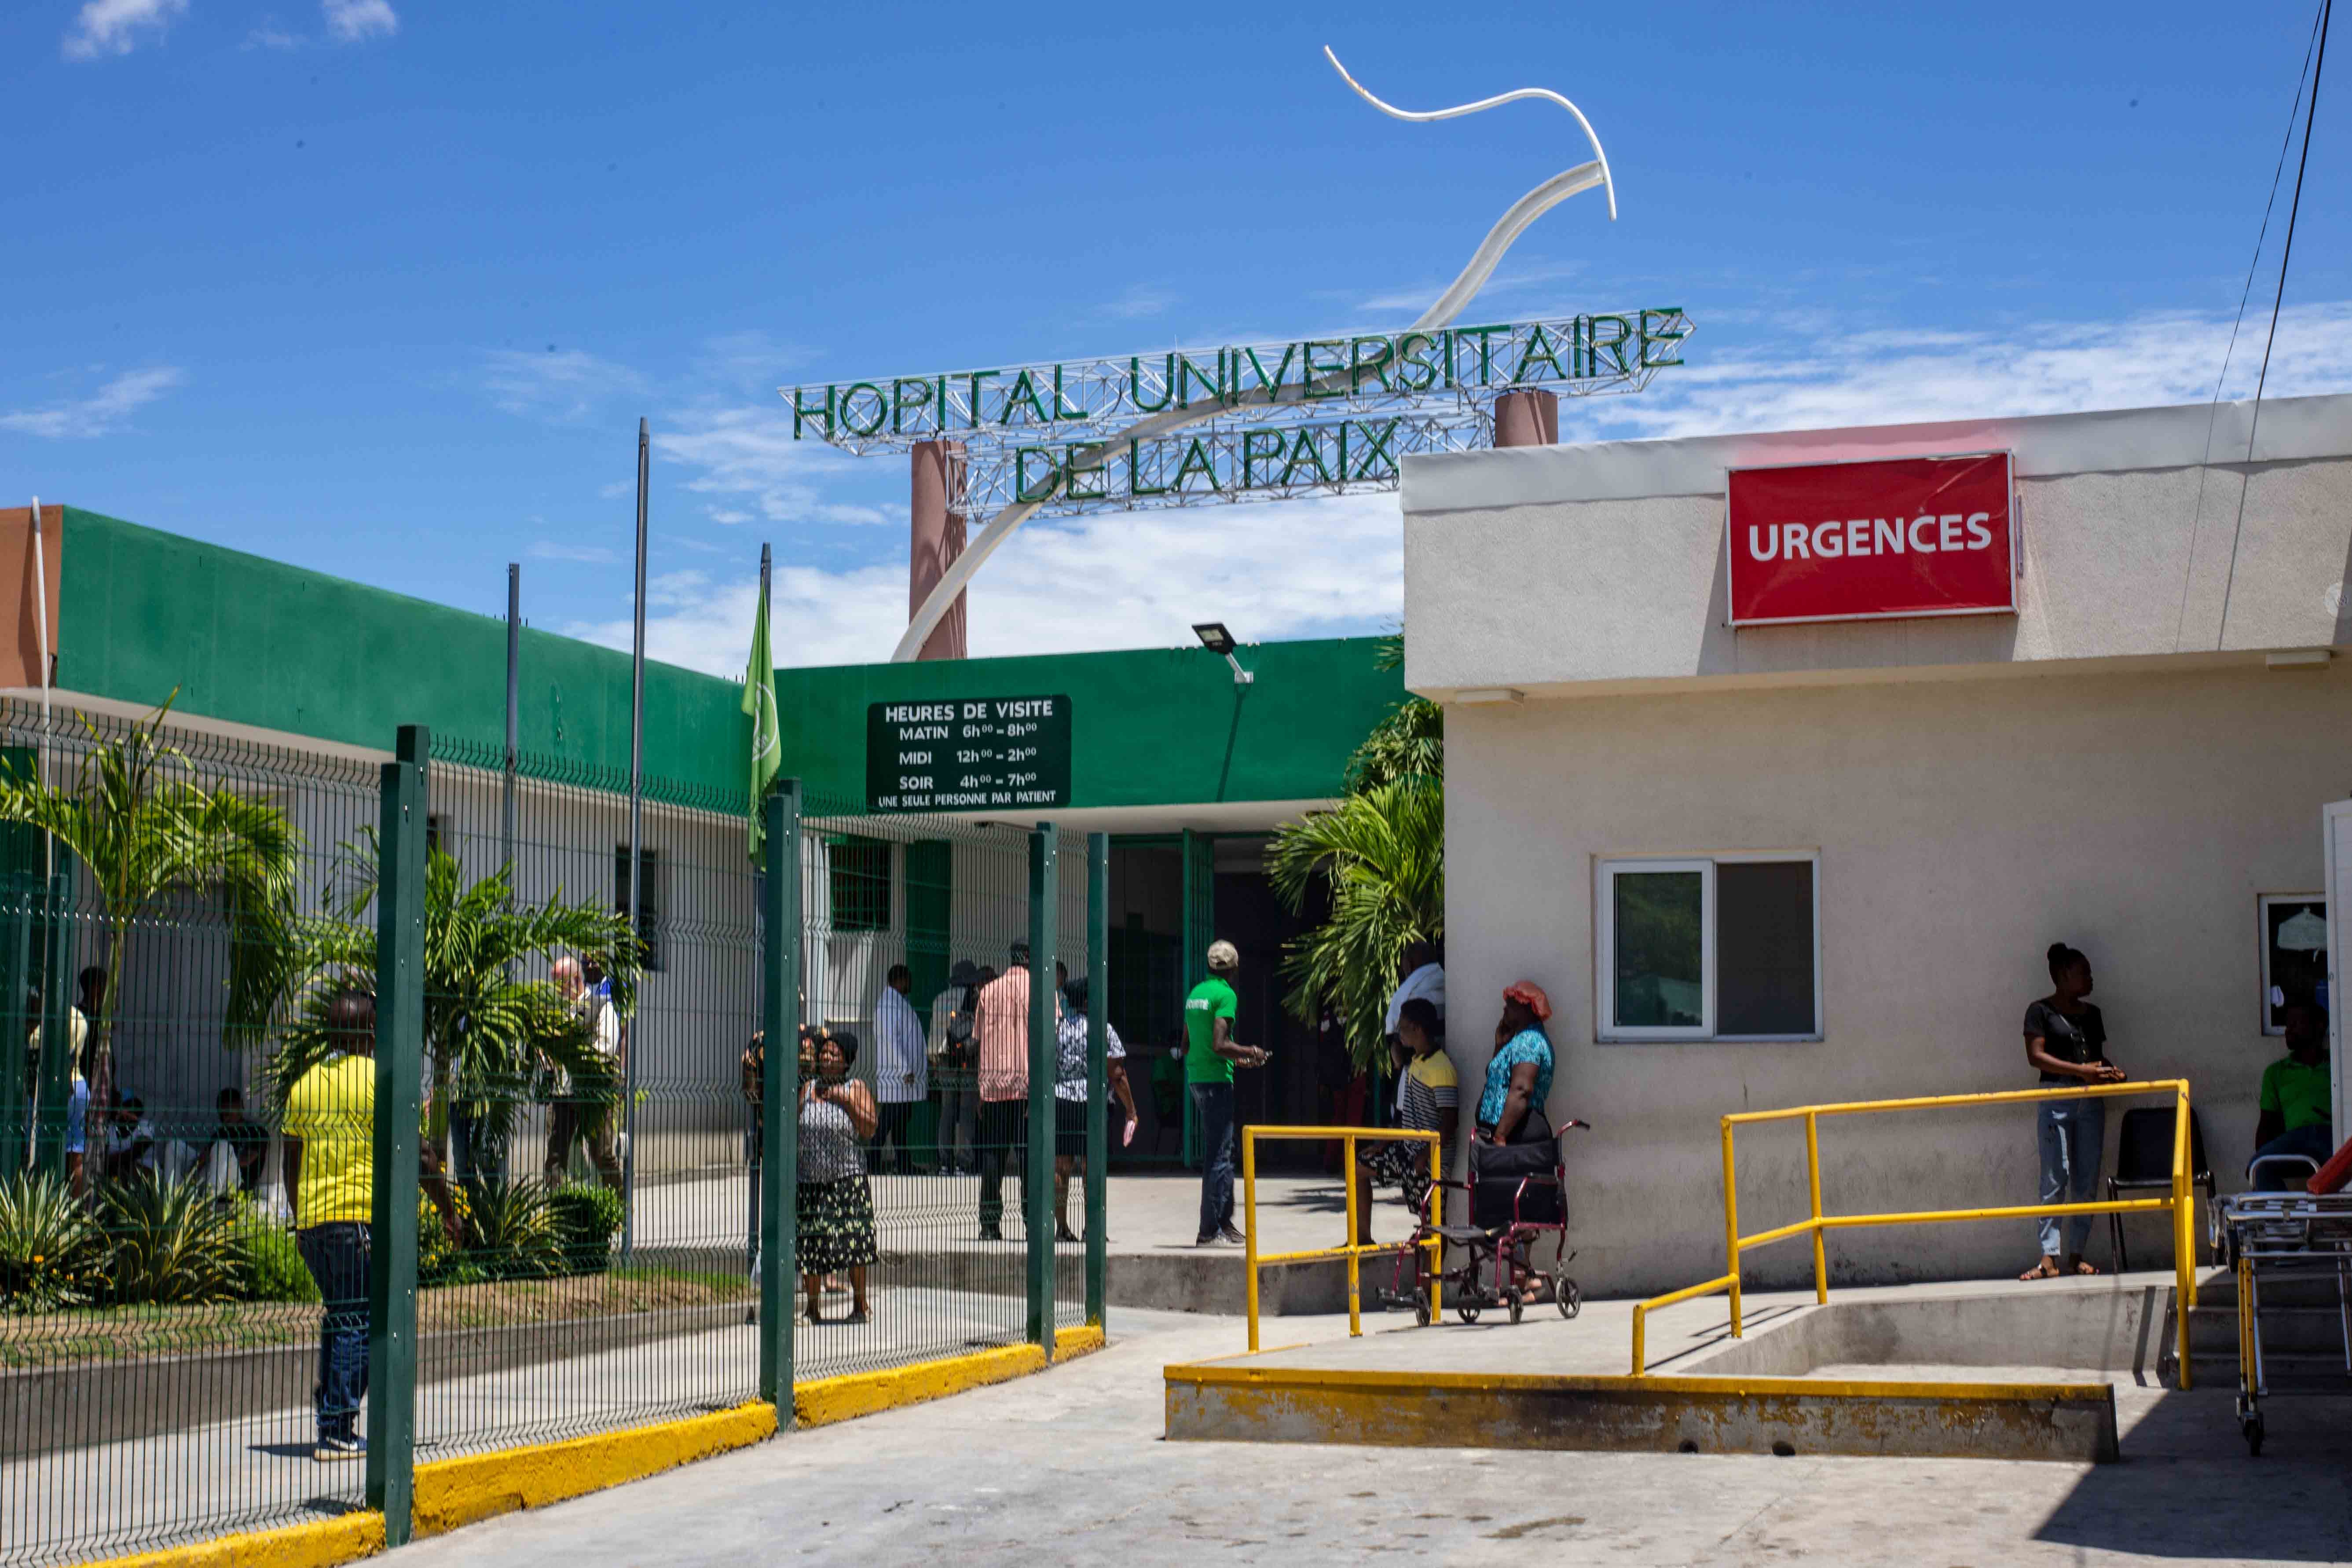 The entrance to Hôpital Universitaire La Paix and its ambulatory emergency room, ( on the right )